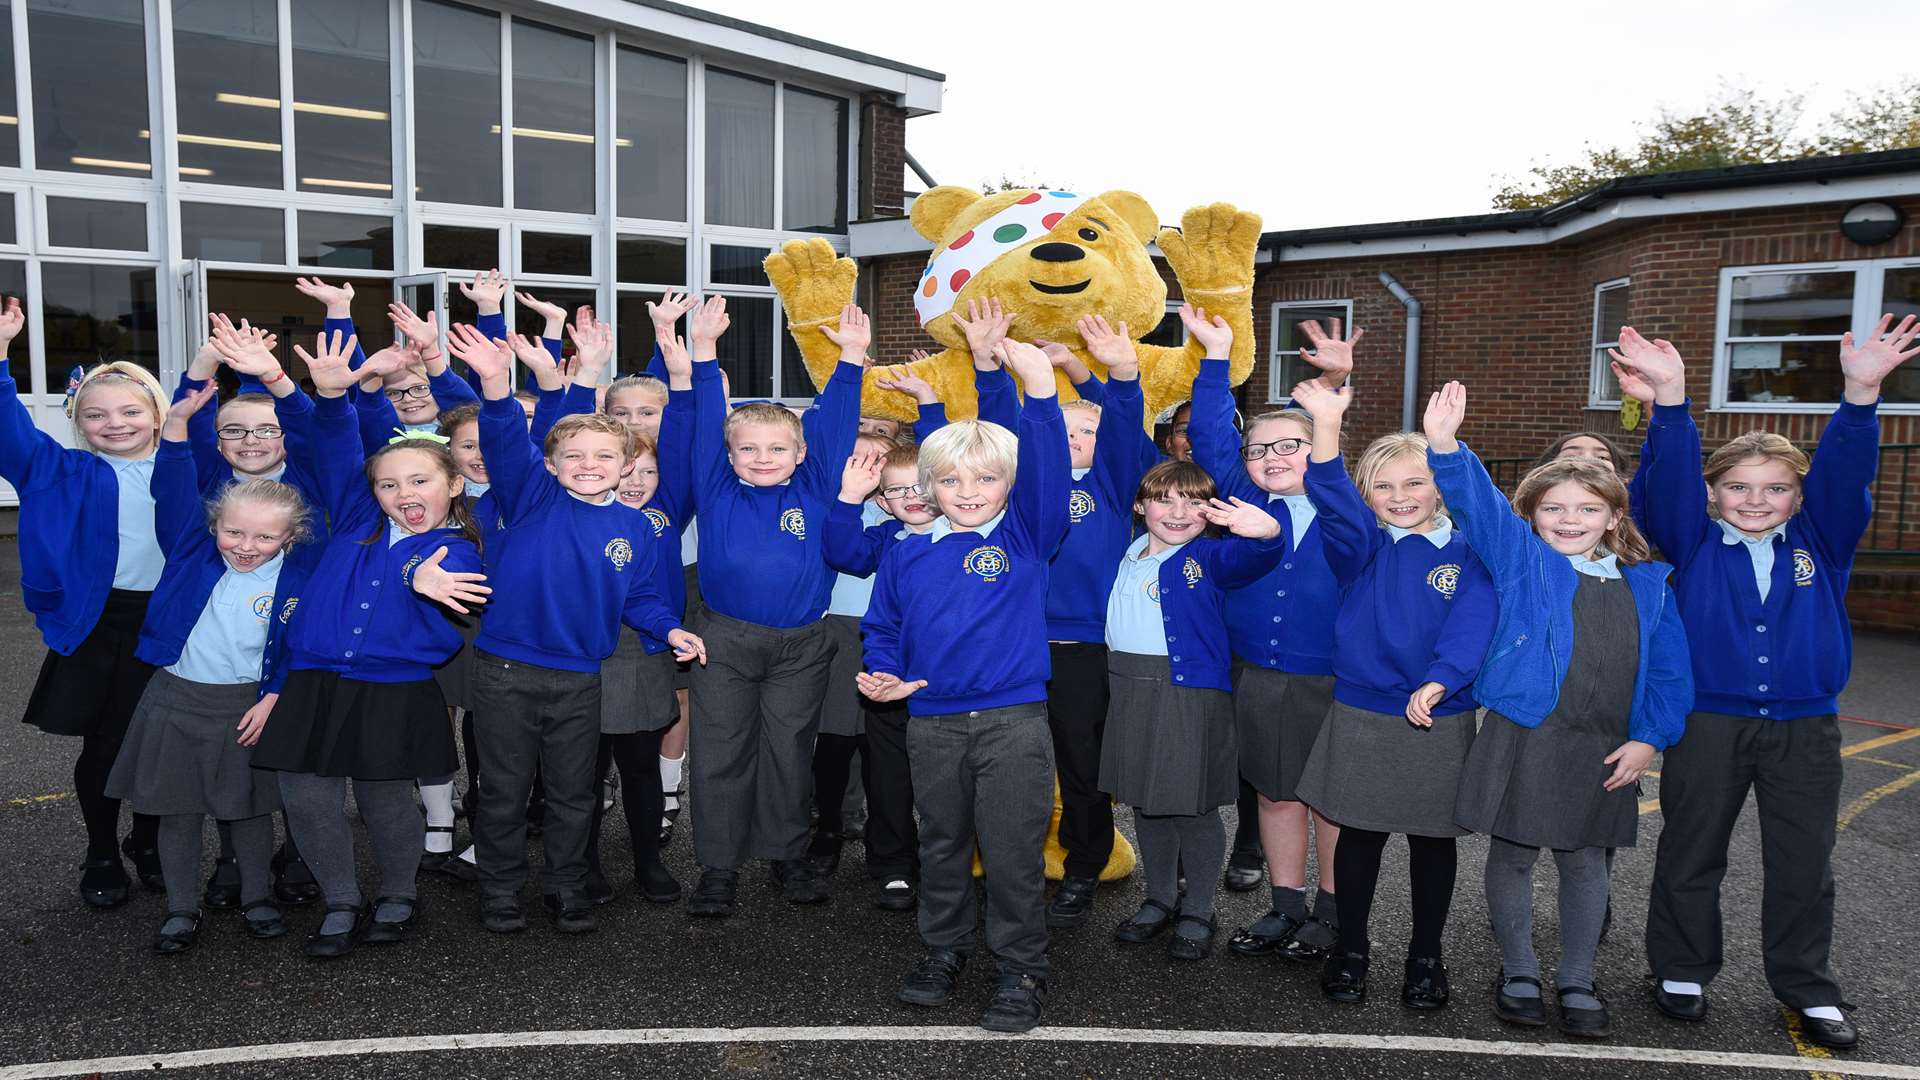 Pudsey visited St Mary's Primary School in Deal